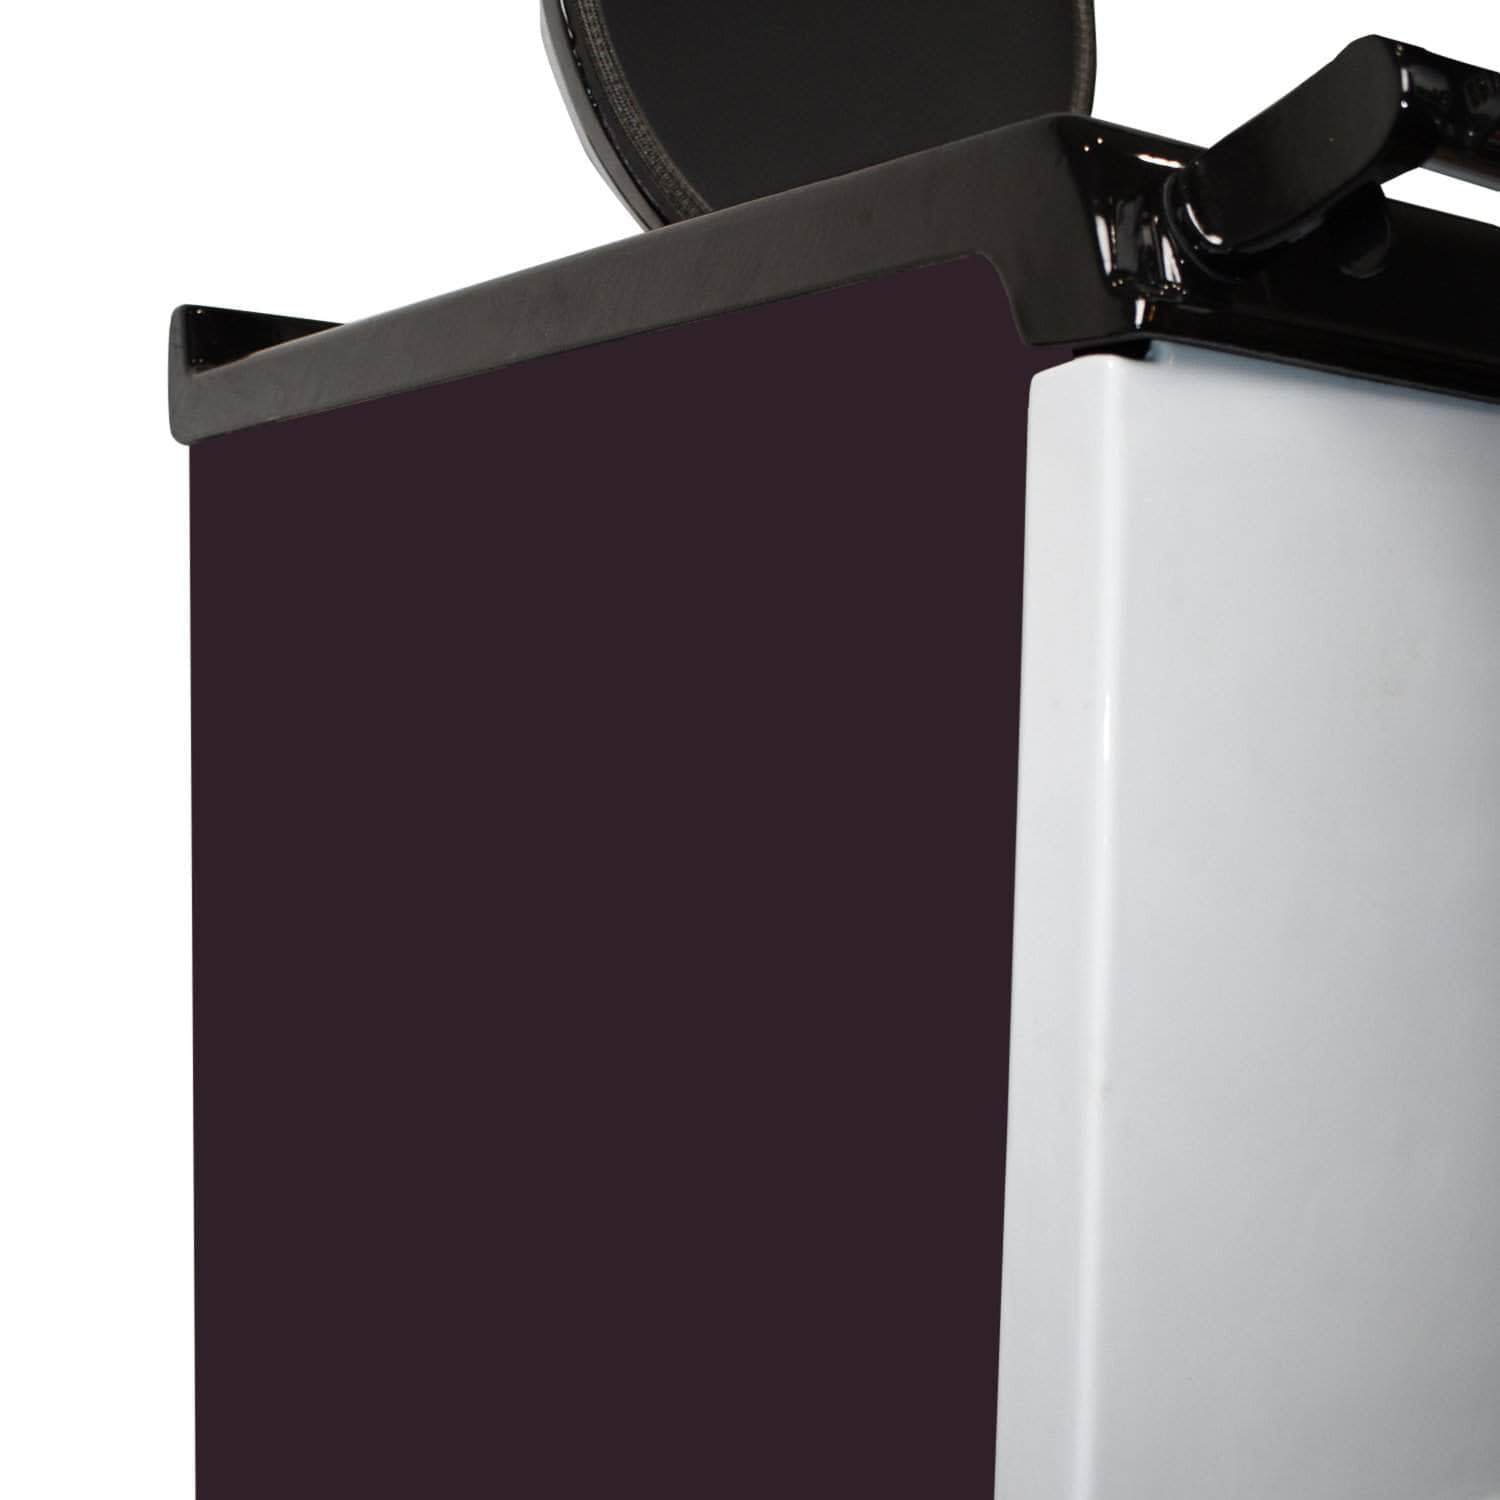 Side panels for use with 'Deluxe' Aga range cookers Aubergine